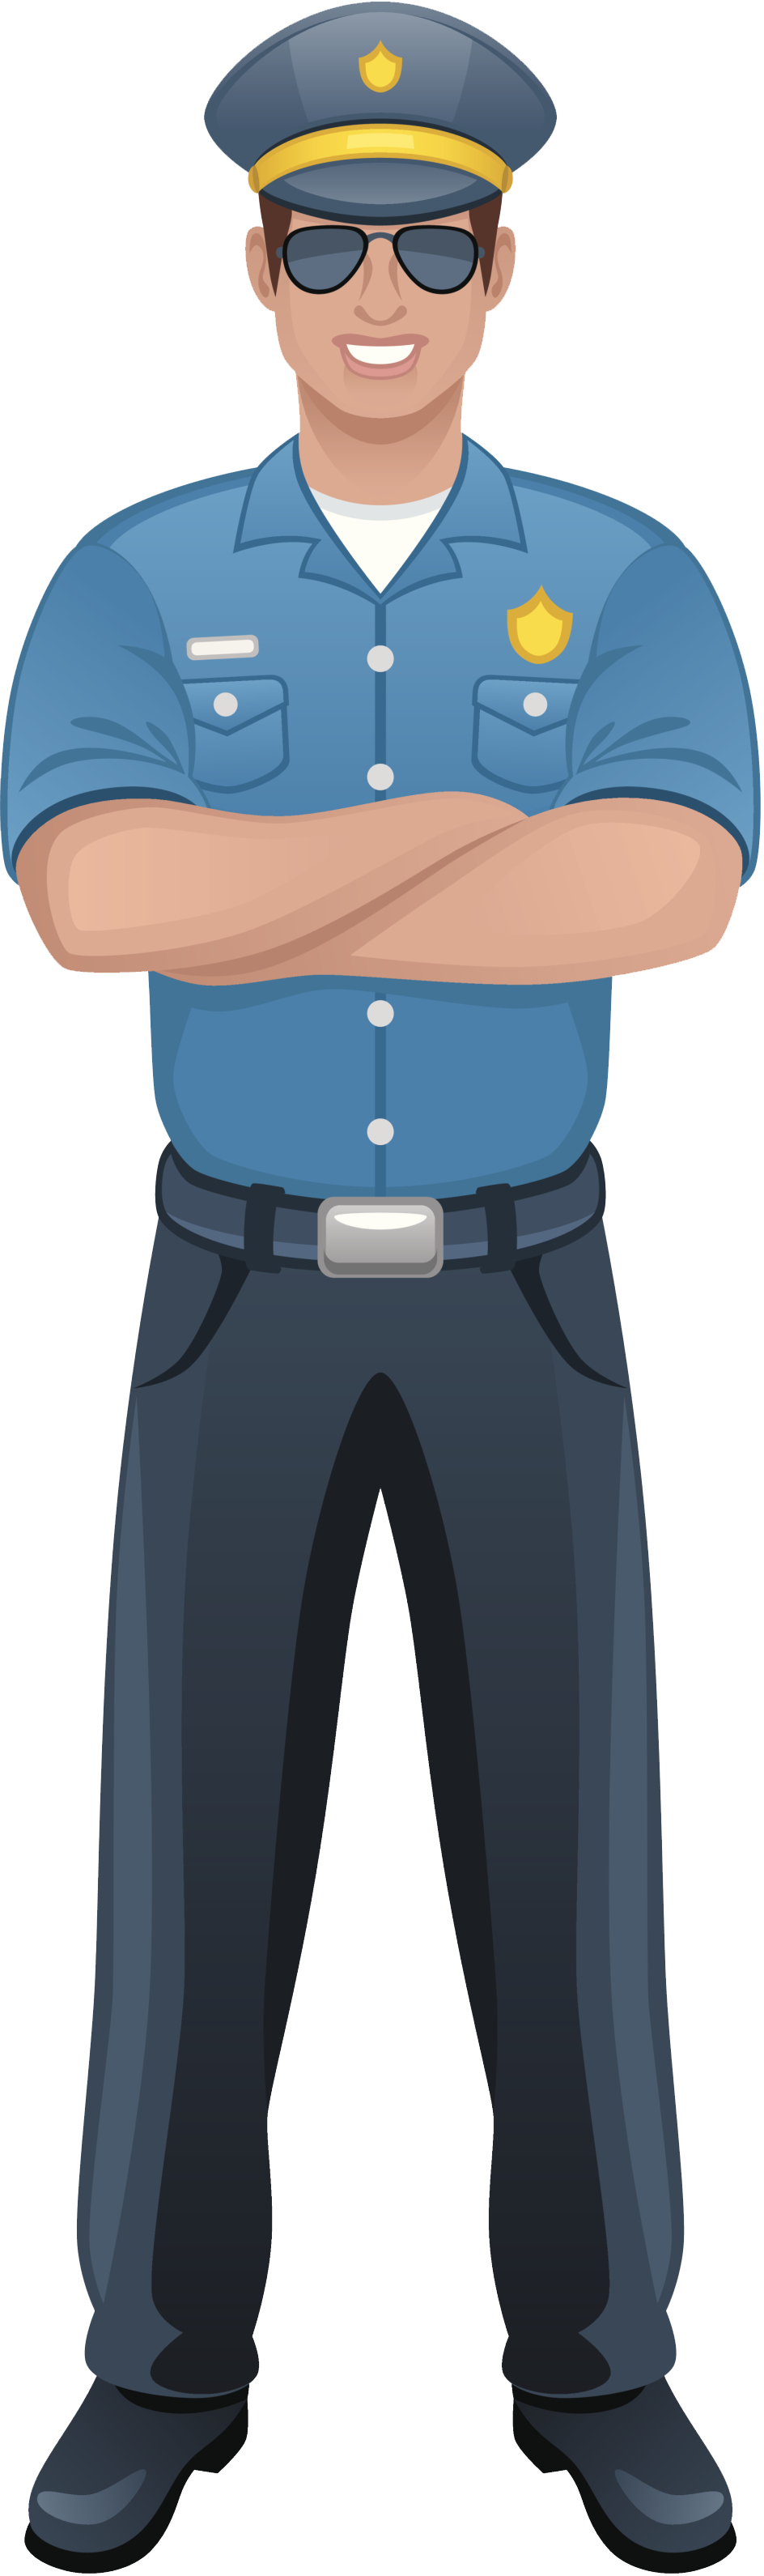 Clipart policeman clipartzo - Clipart Police Officer